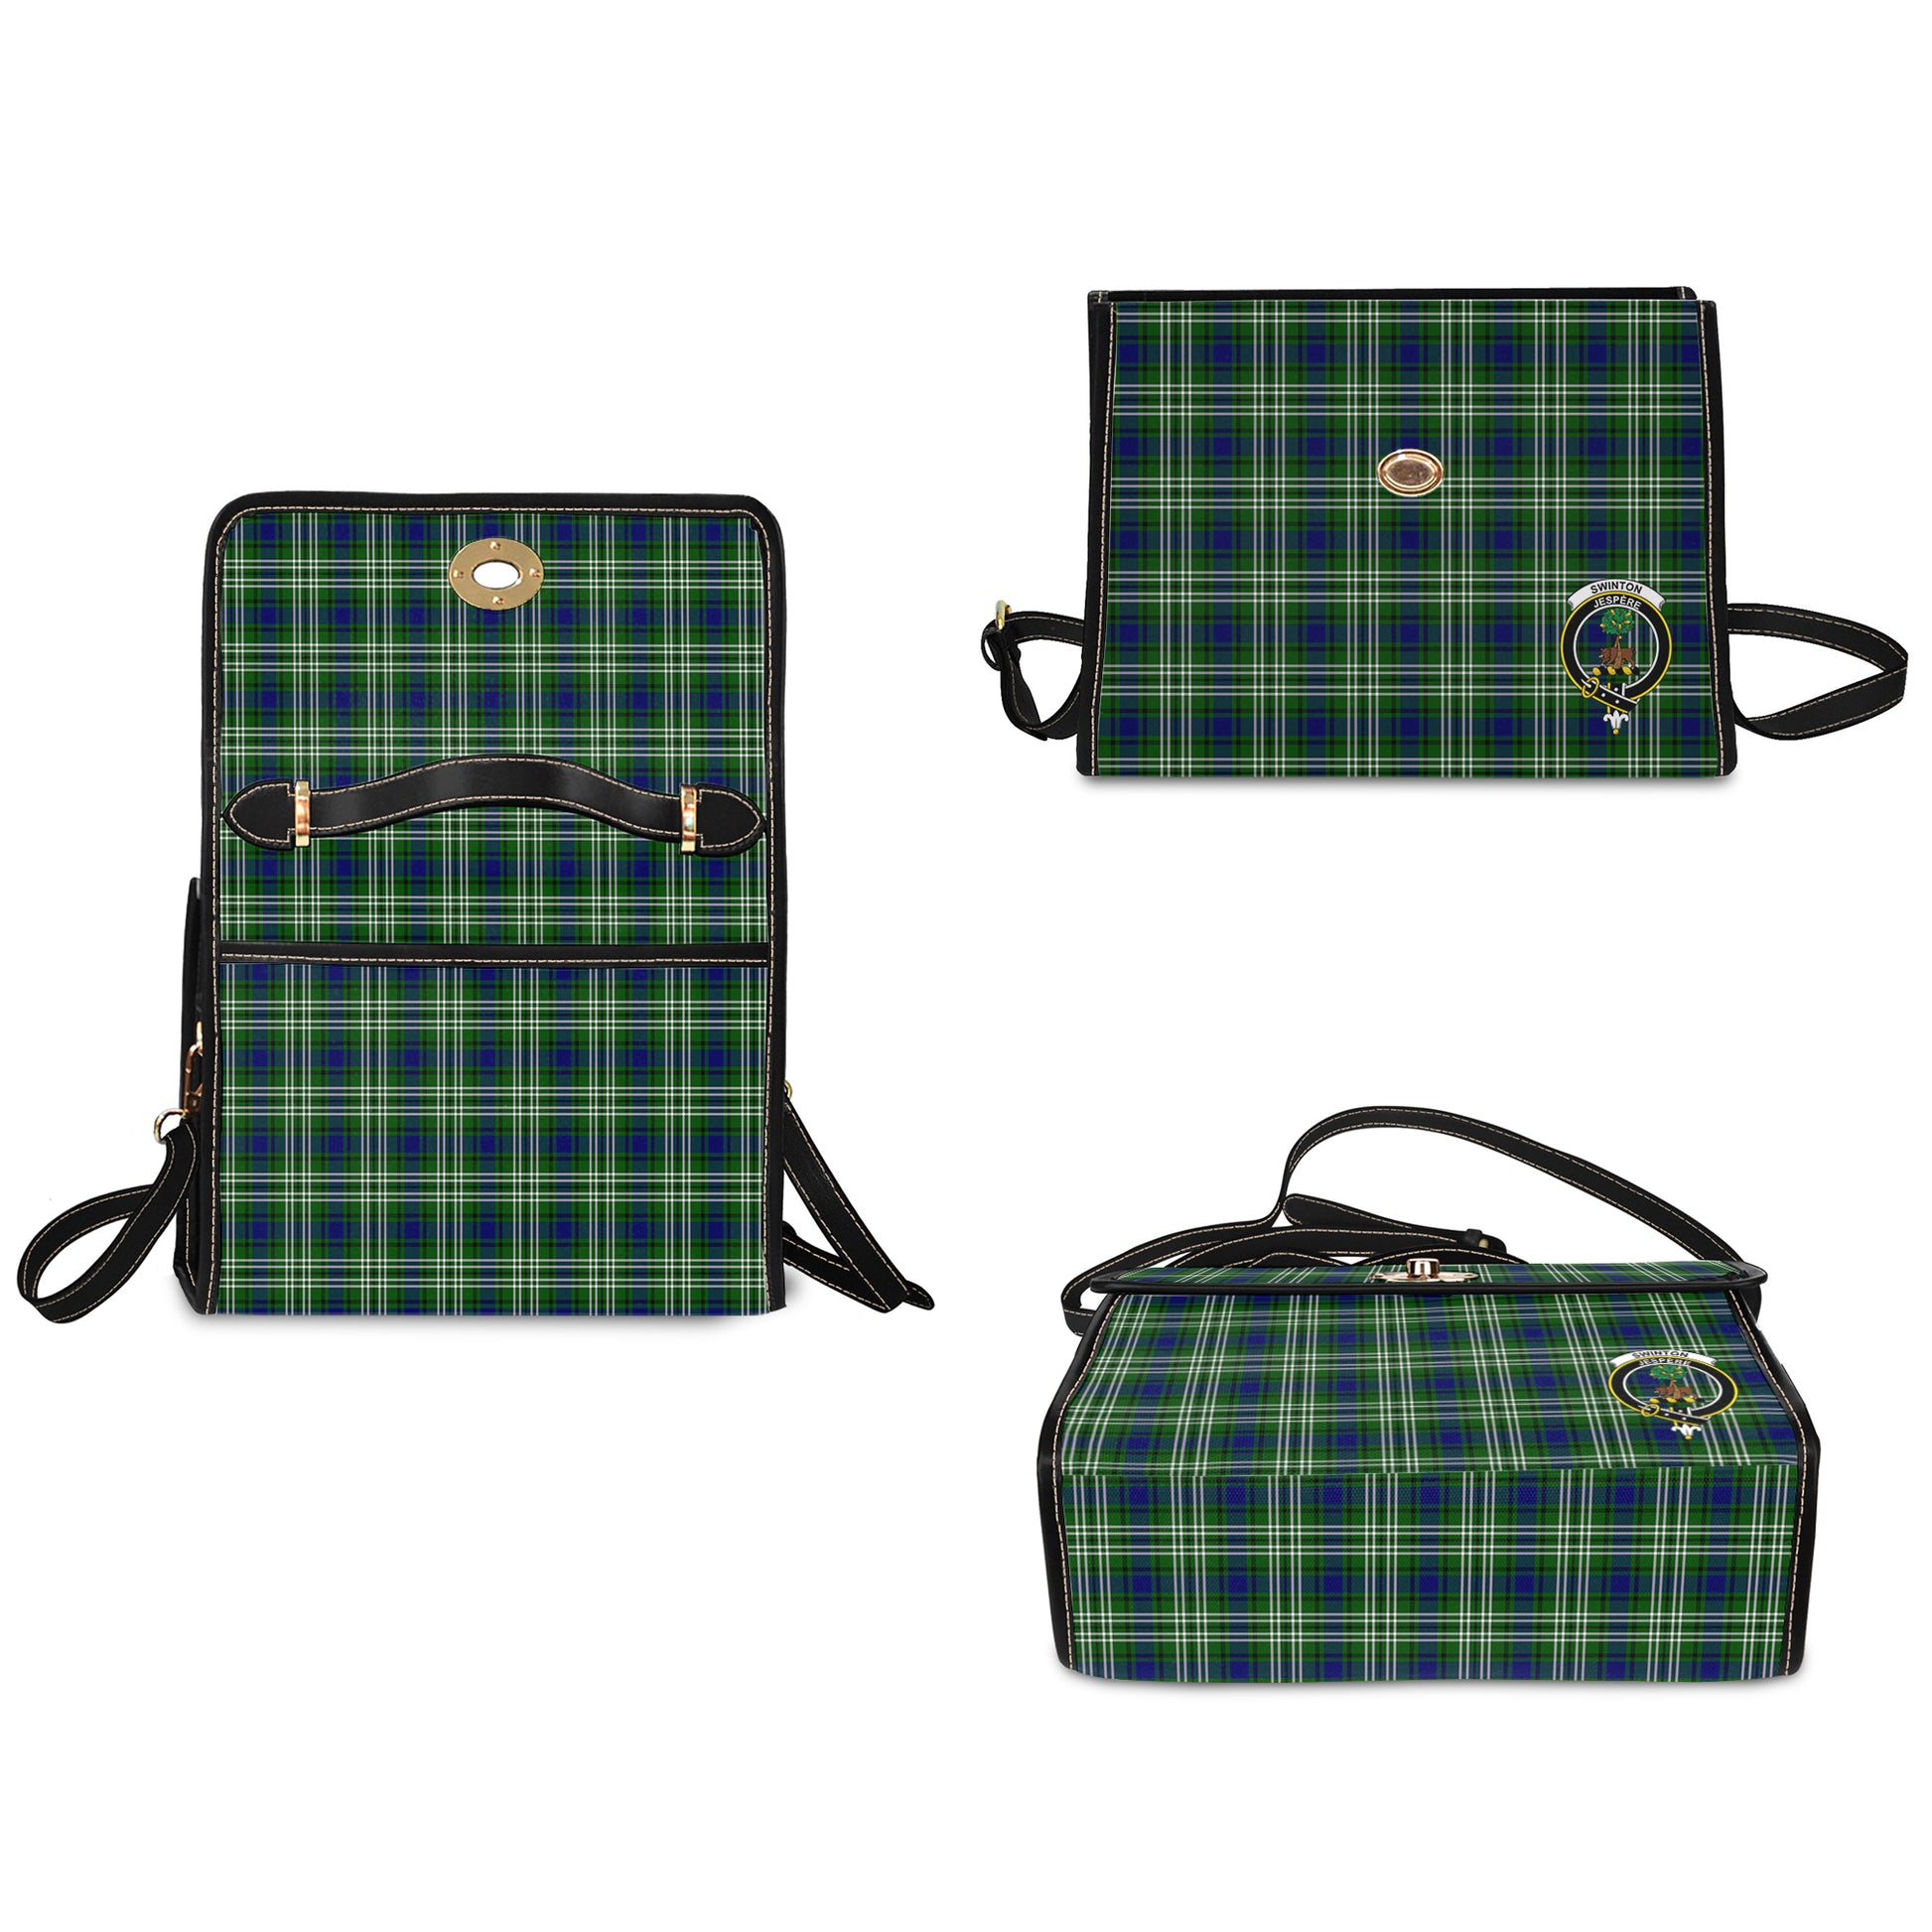 swinton-tartan-leather-strap-waterproof-canvas-bag-with-family-crest